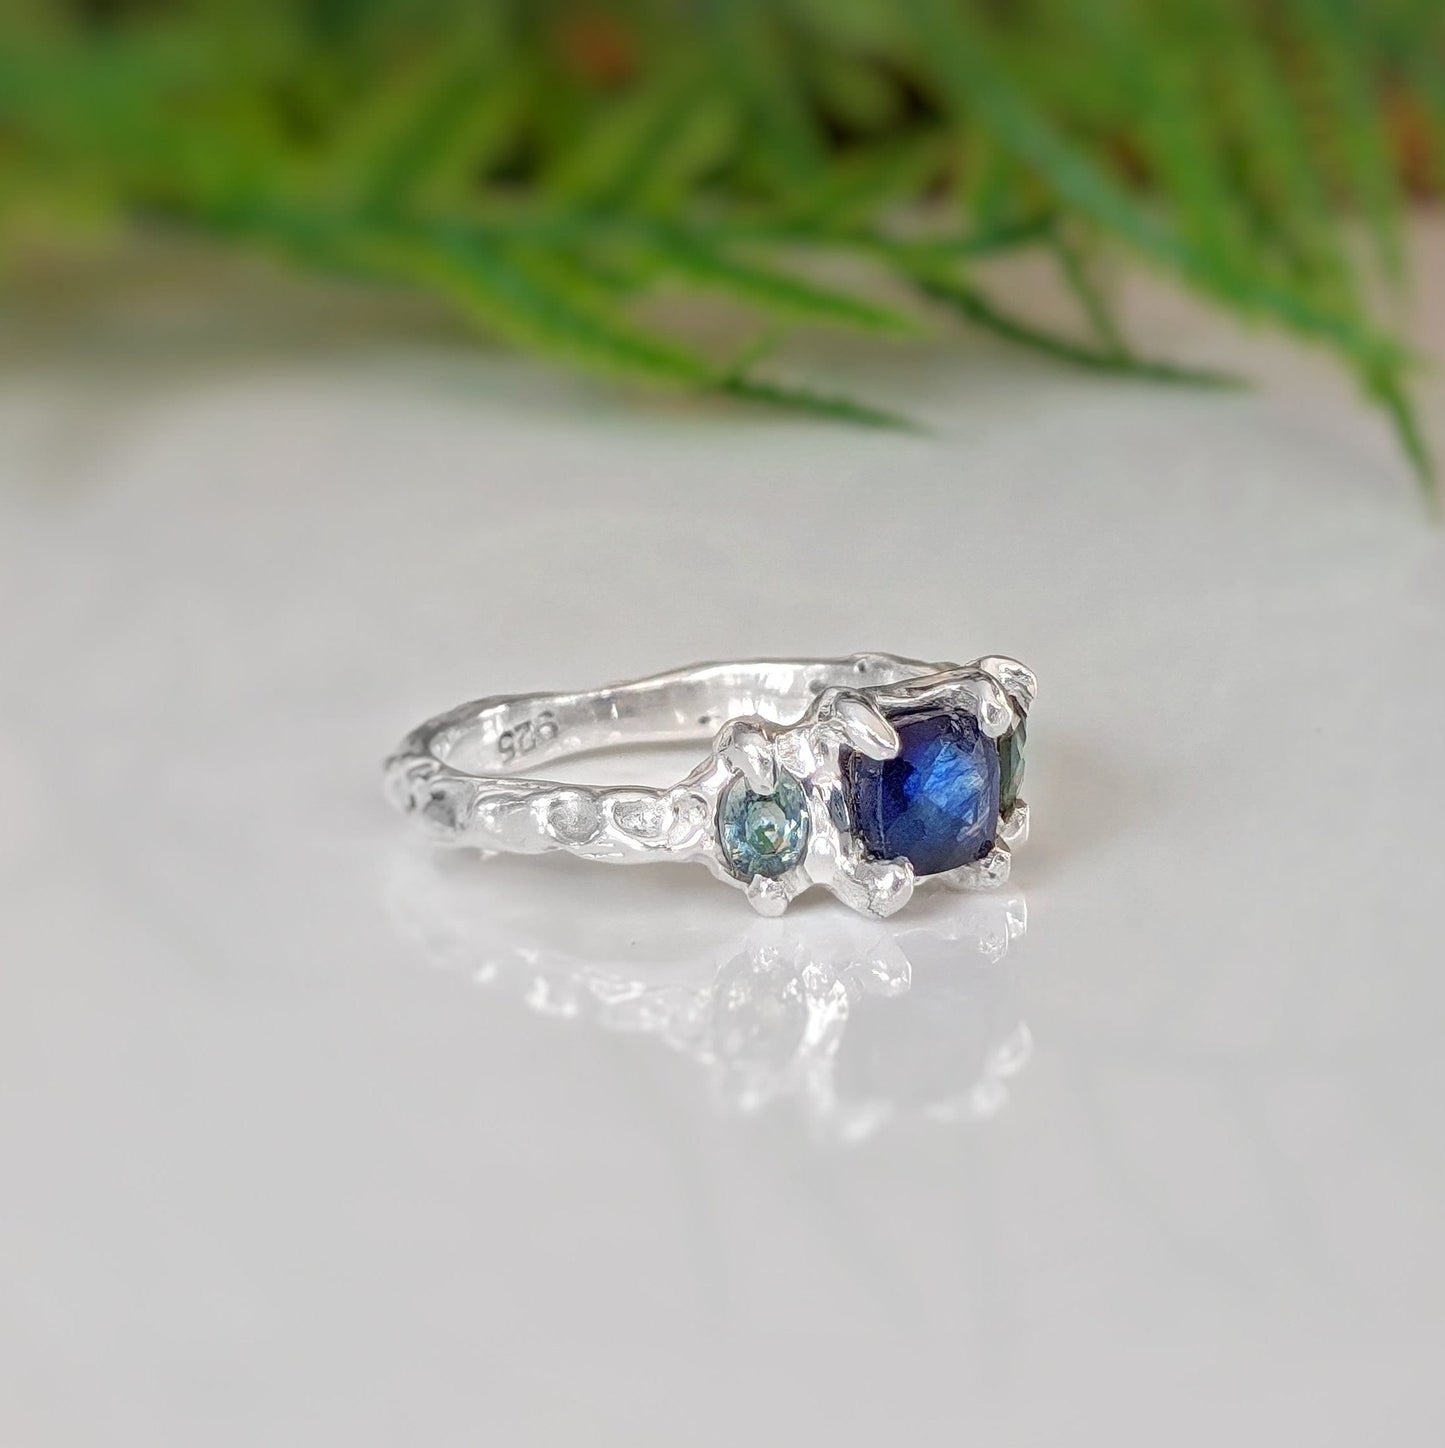 Square Blue Sapphire and 2 small green Tourmaline set by prongs on a textured Sterling Silver band